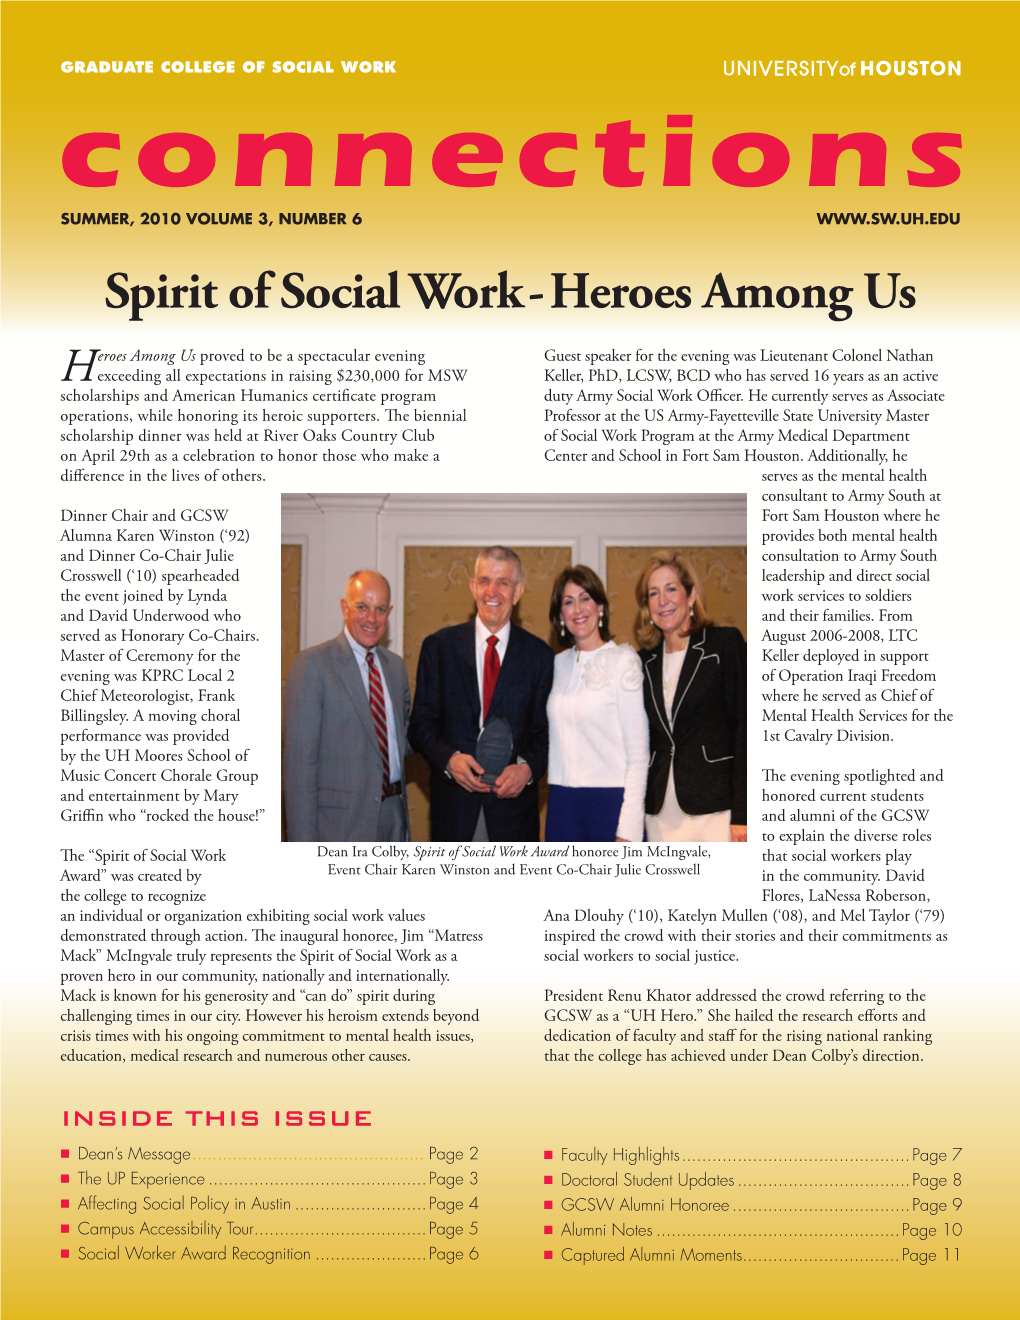 Connections SUMMER, 2010 VOLUME 3, NUMBER 6 Spirit of Social Work - Heroes Among Us